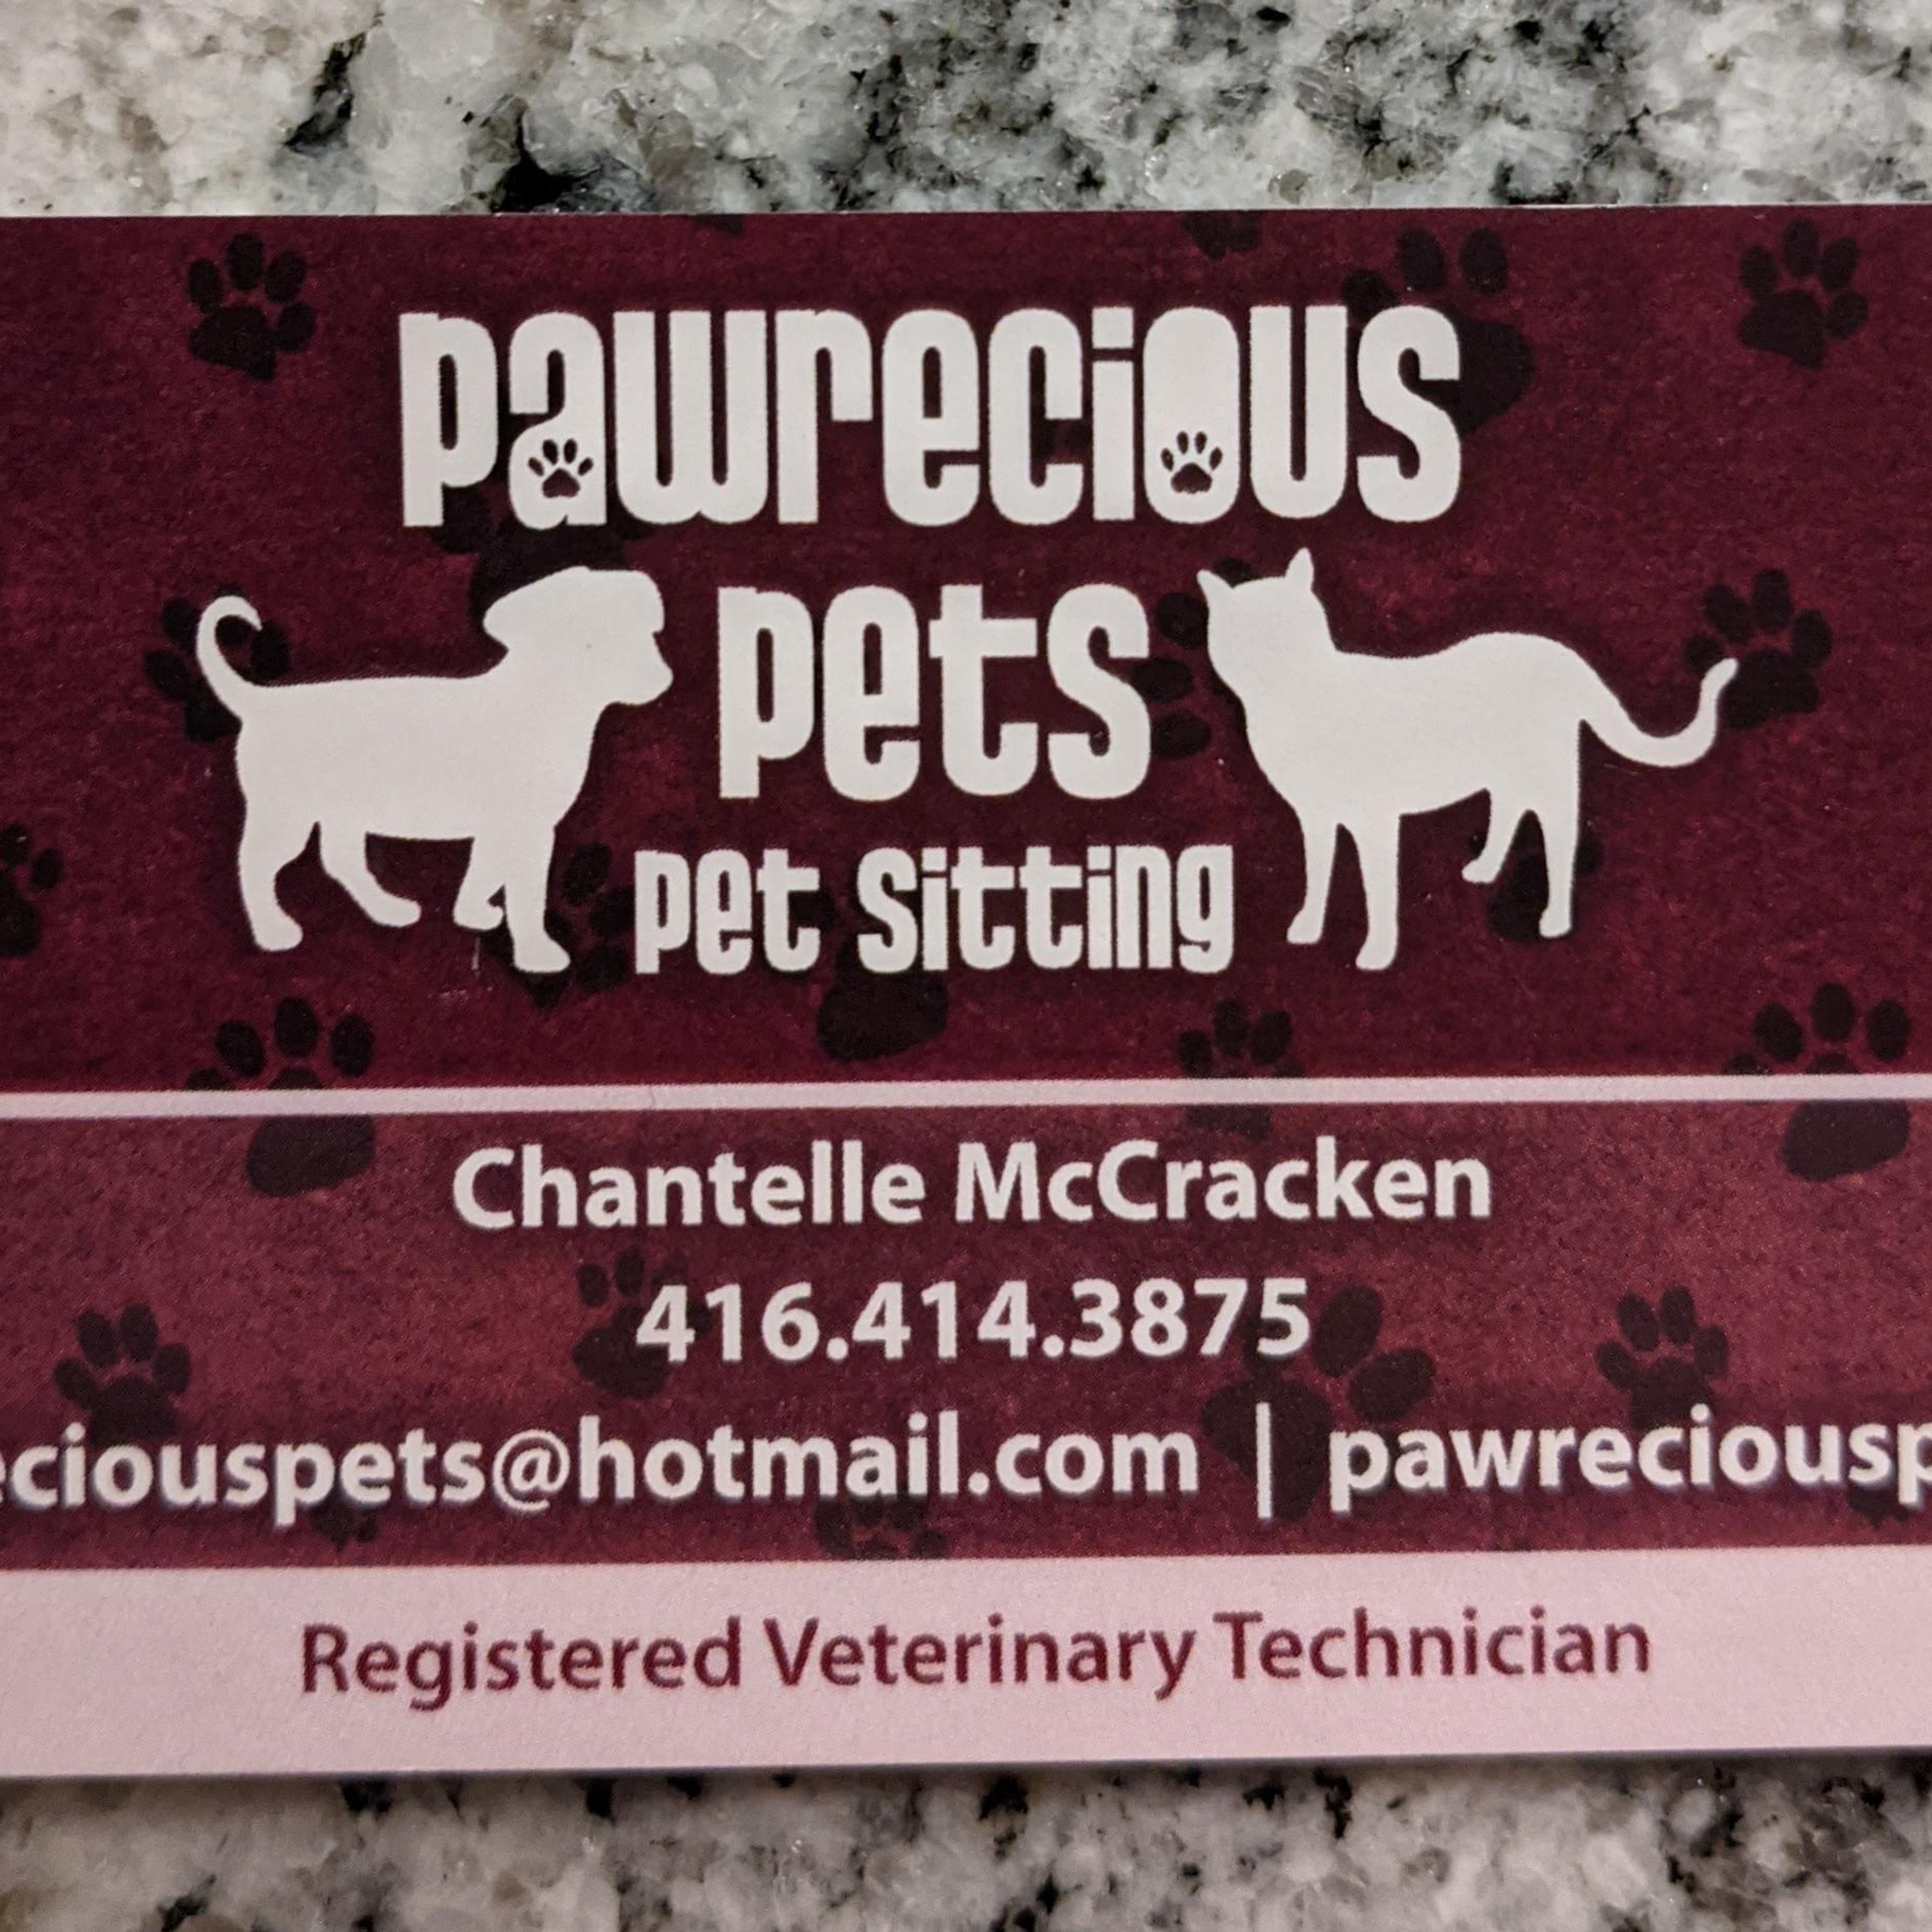 We specialize in providing personalized professional pet care and in home pet sitting in the. County